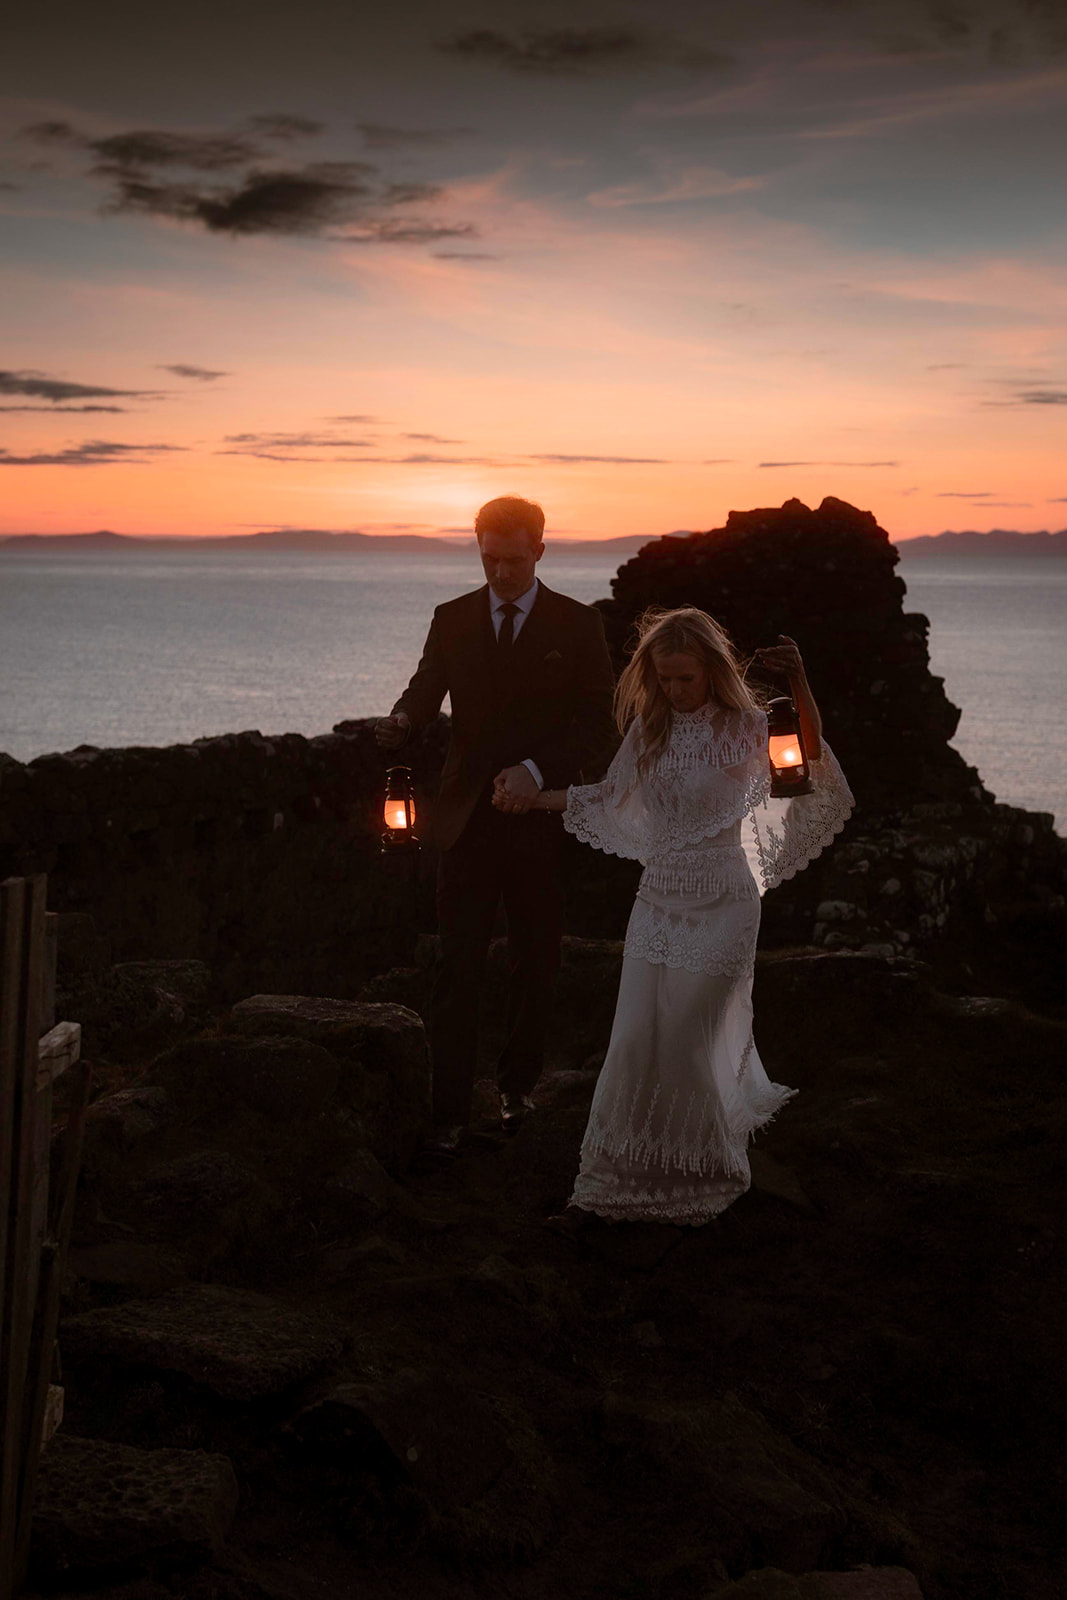 With their lanterns, Kara and Andy stroll around the breathtaking Isle of Skye.